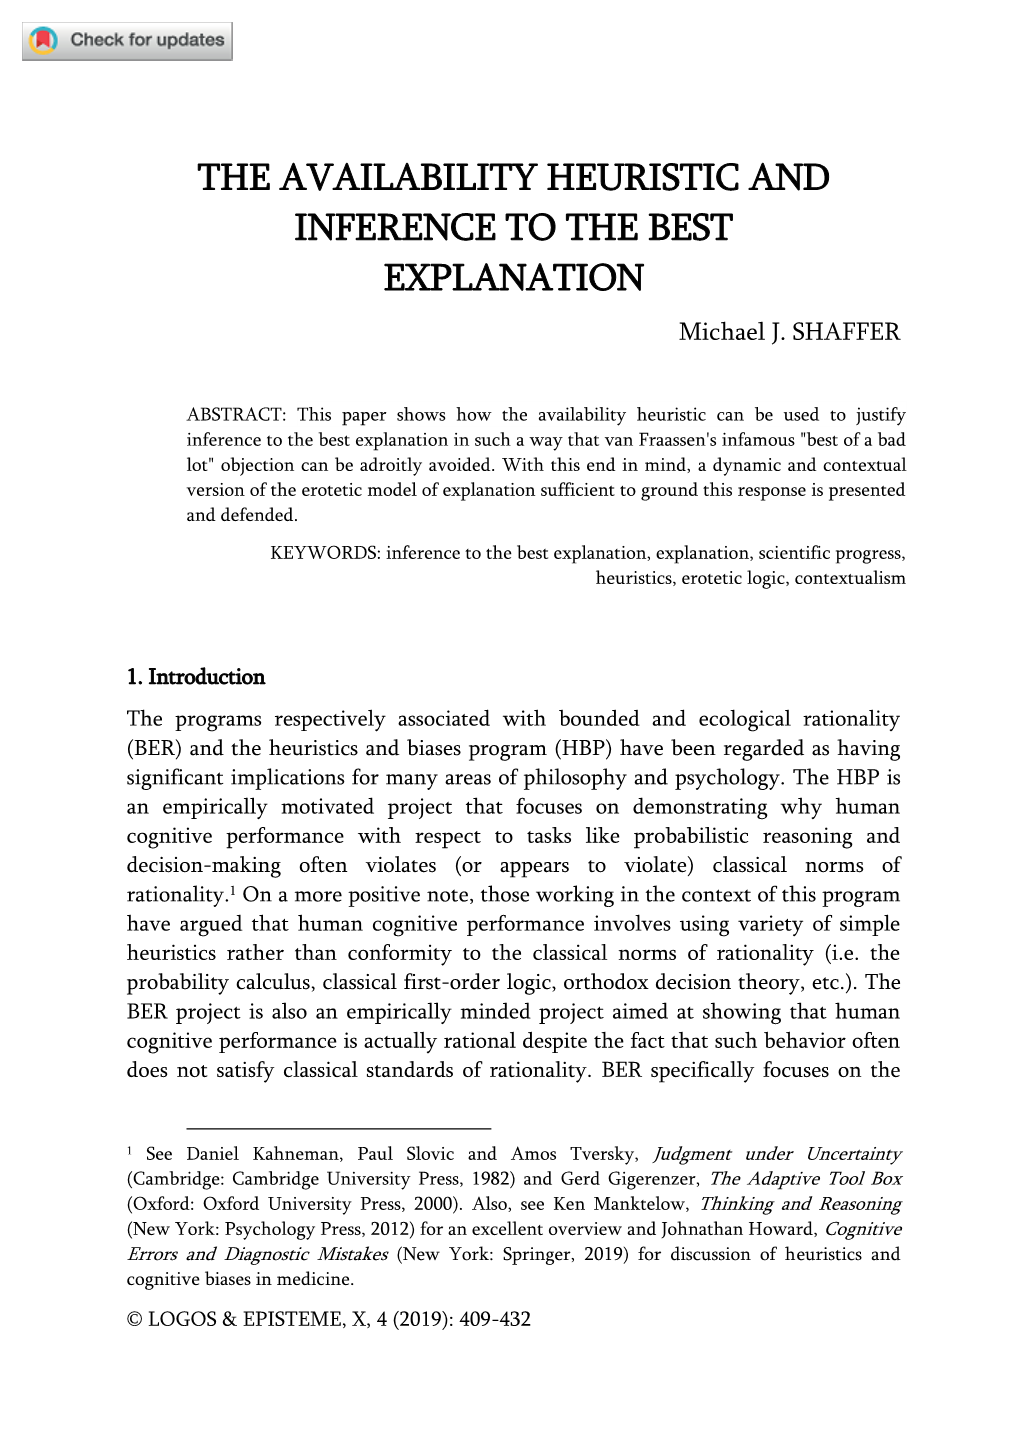 THE AVAILABILITY HEURISTIC and INFERENCE to the BEST EXPLANATION Michael J